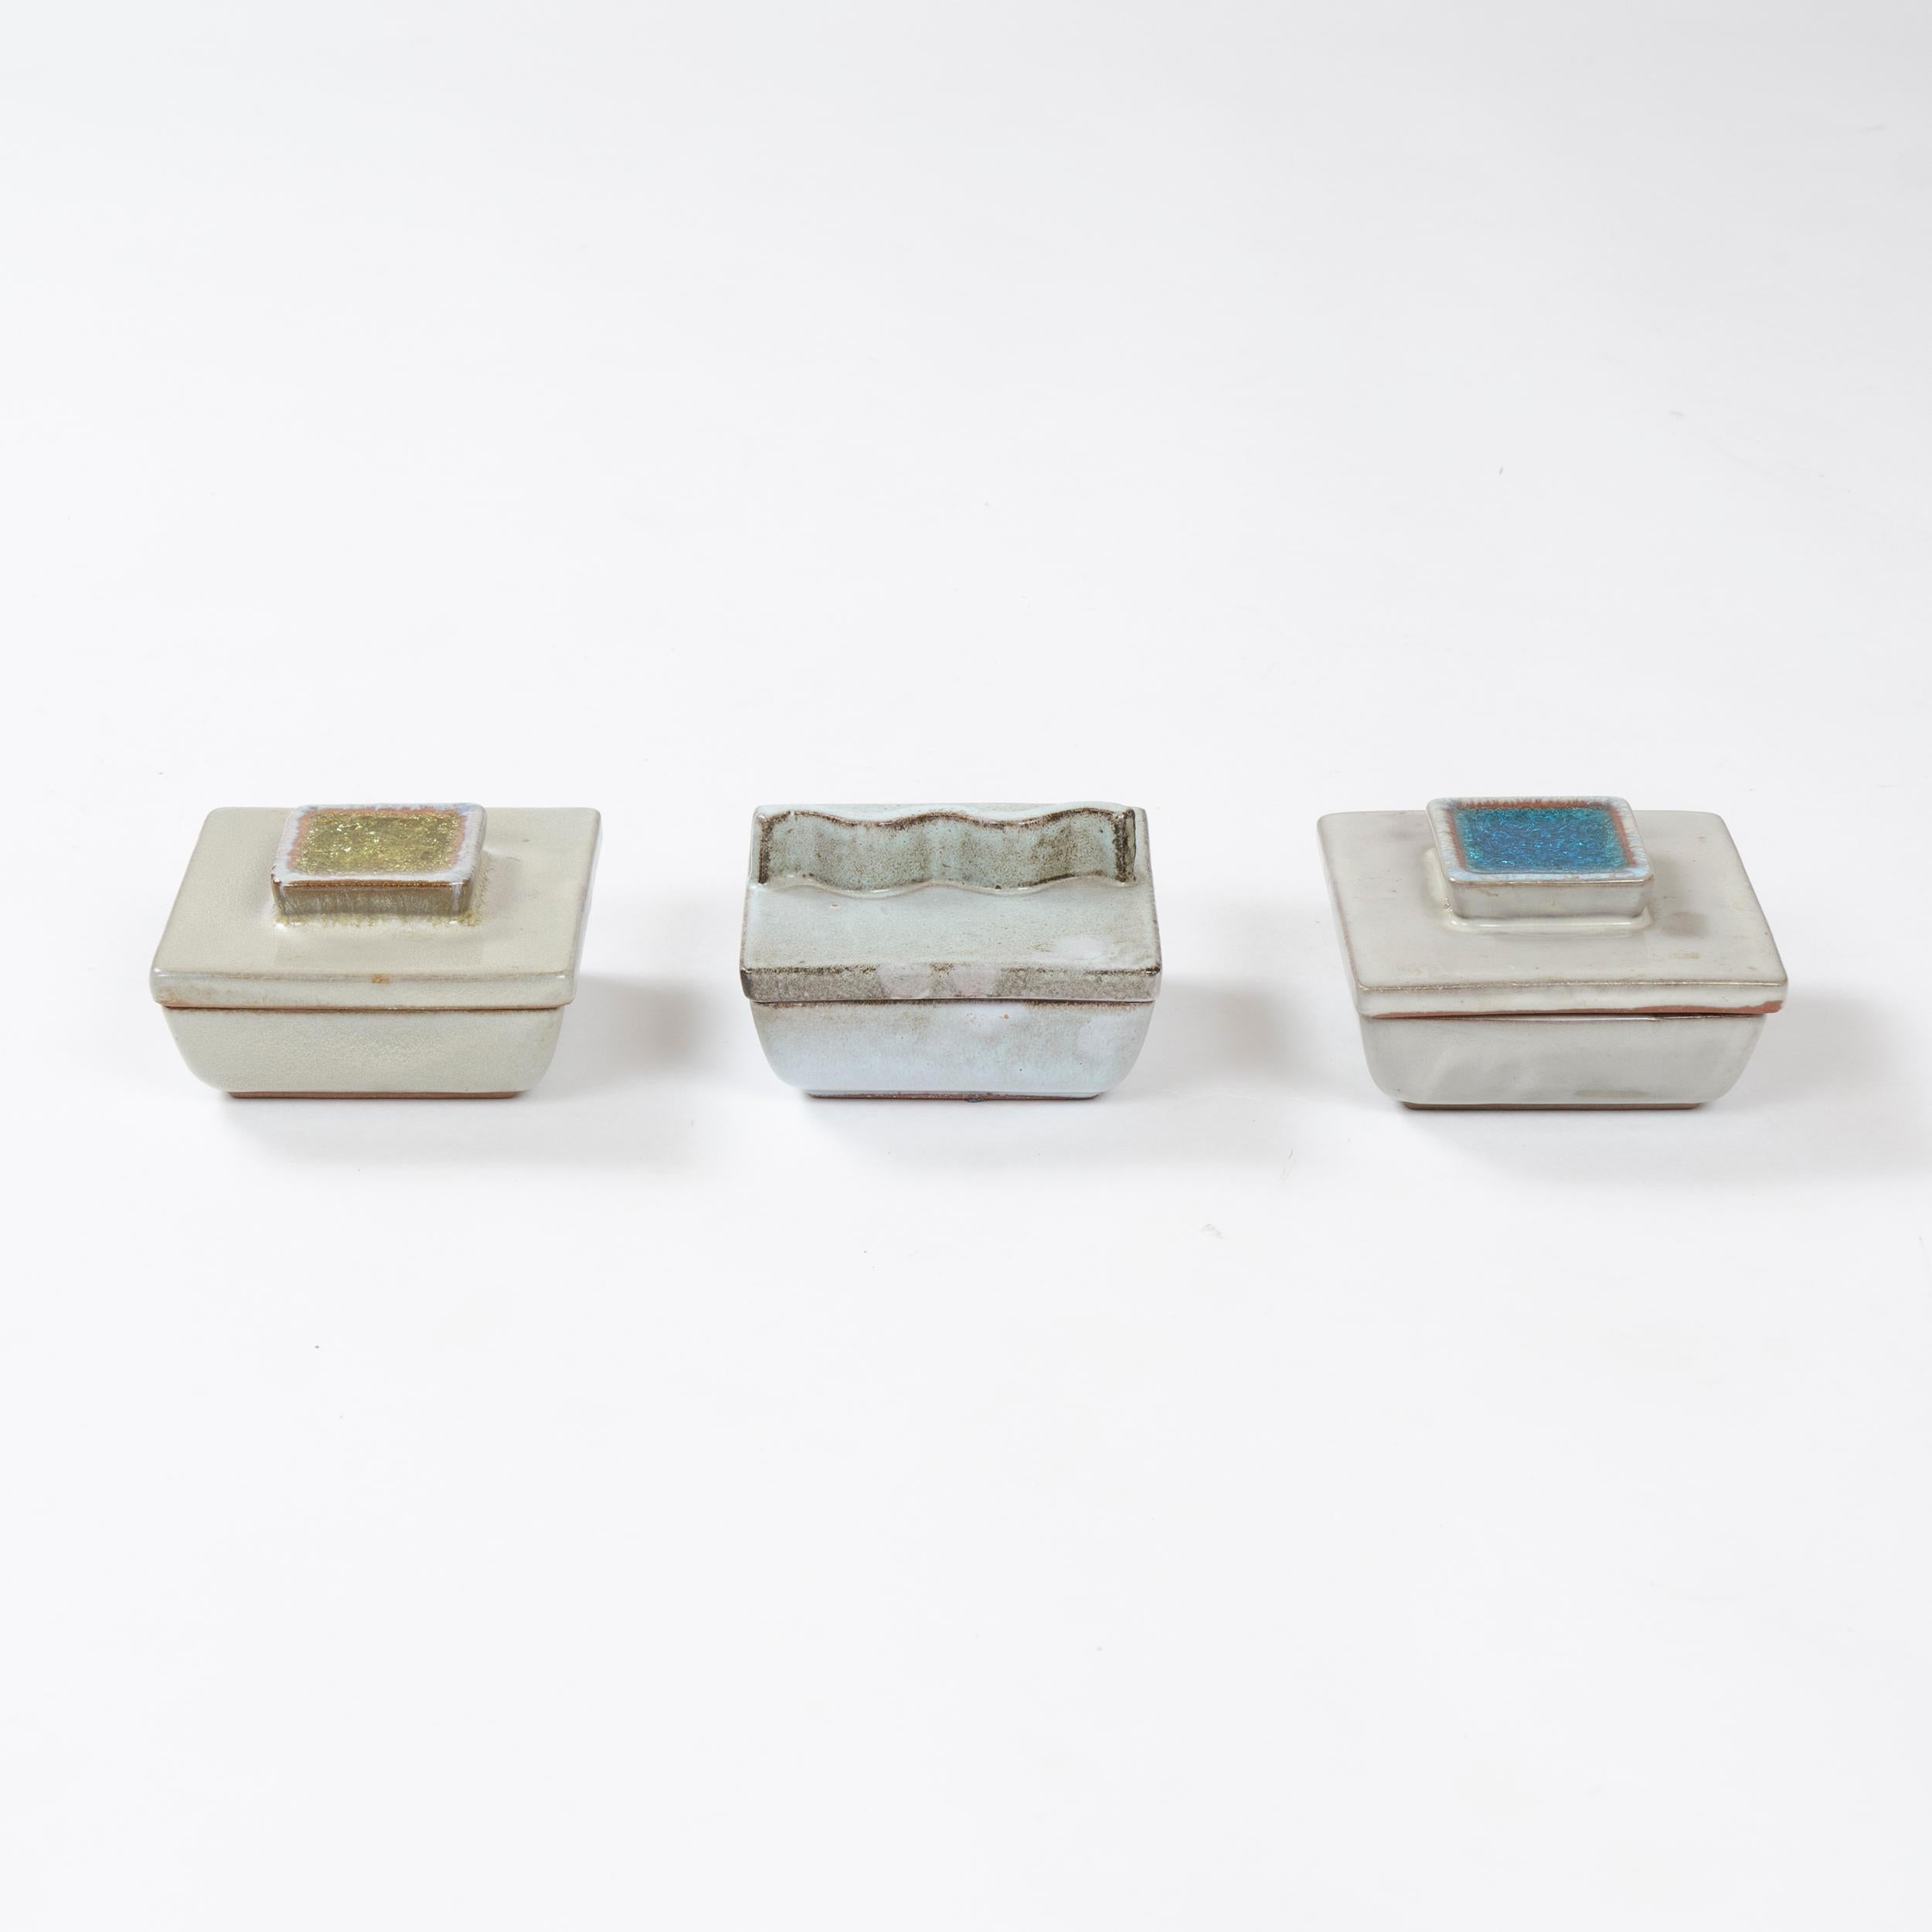 A set of three ceramic lidded boxes, two with crackled glass inlaid handles and one with a squiggle cut handle.